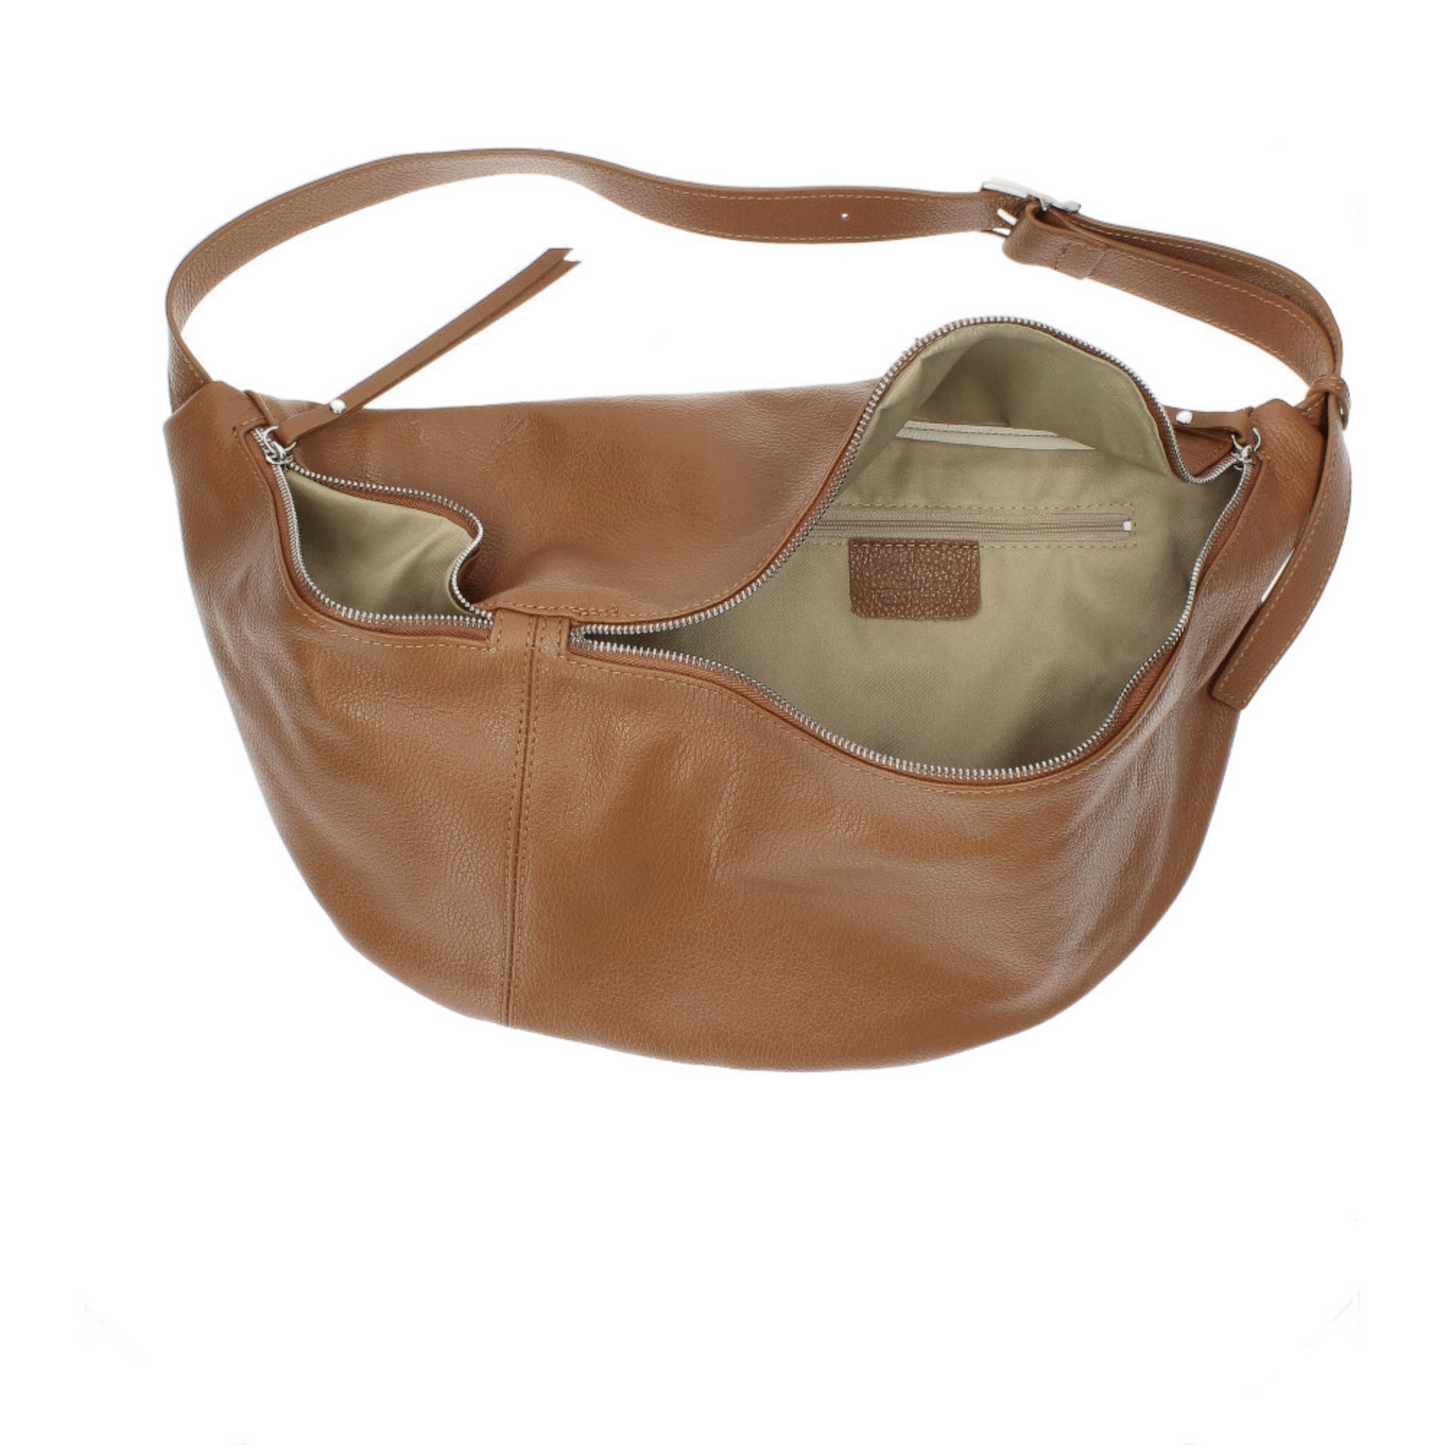 The XL Leather BumBag / Sling Bag